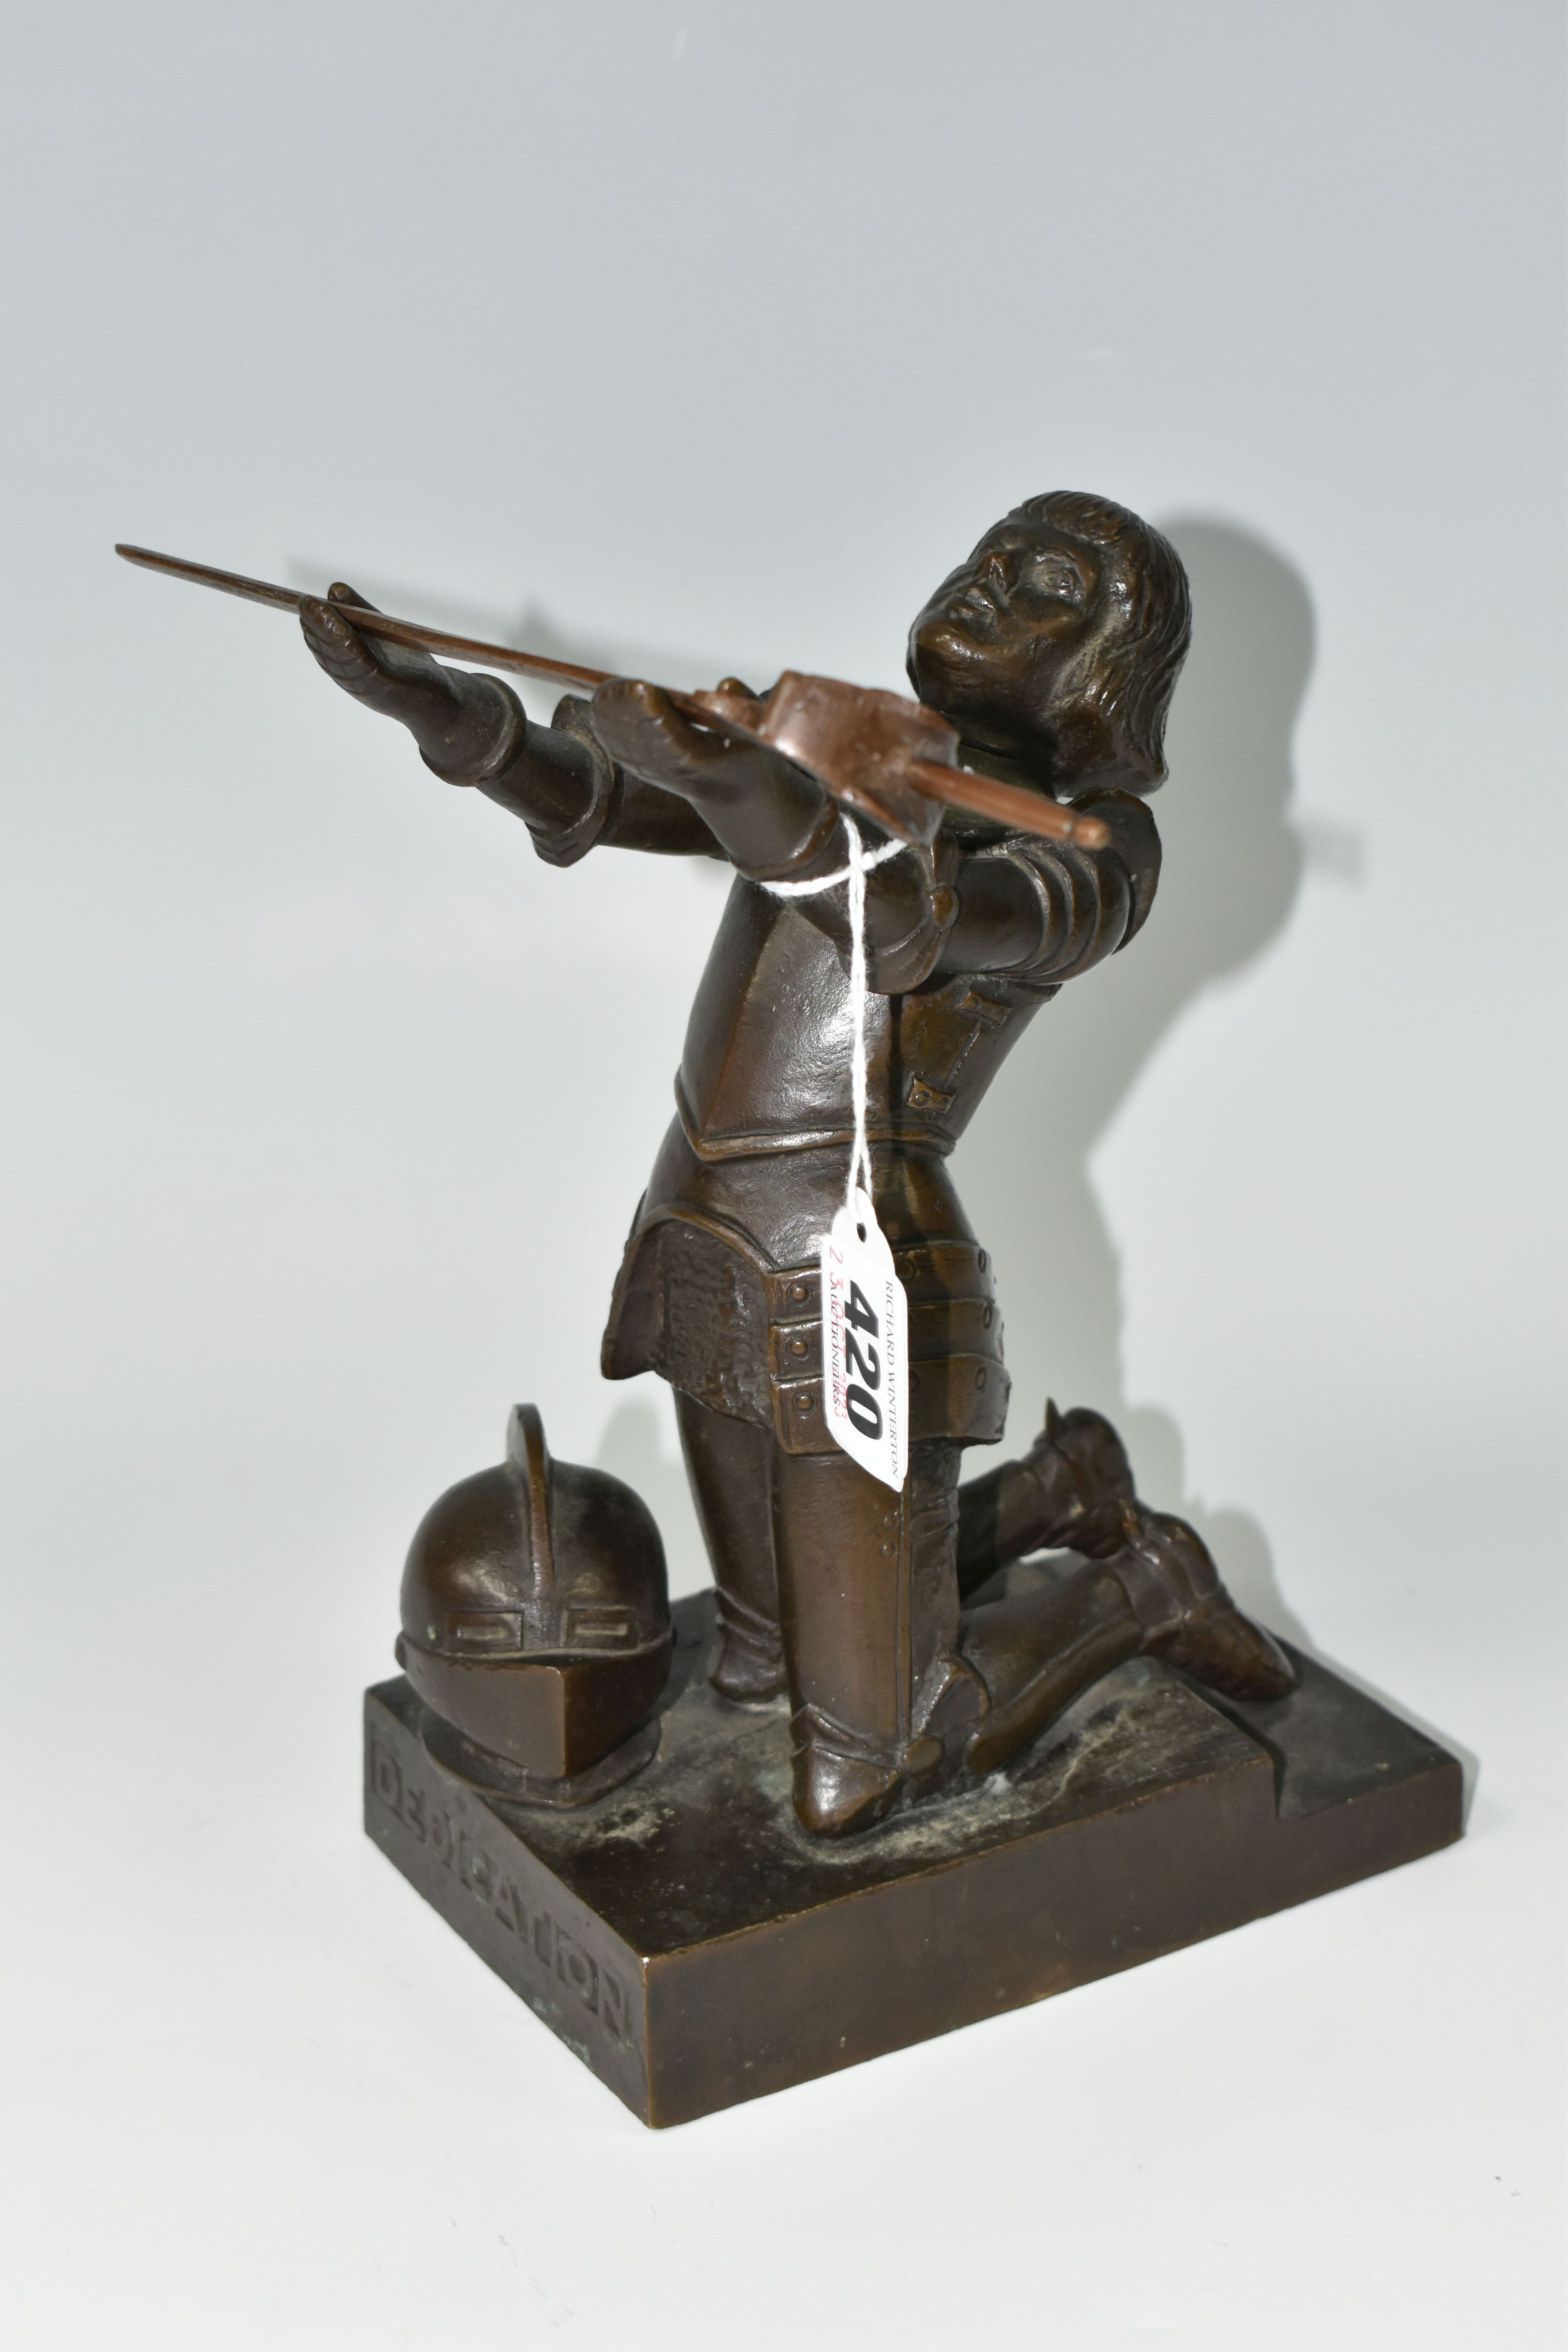 A BRONZE FIGURE OF A KNIGHT, titled Dedication, depicting a kneeling knight holding his sword - Image 2 of 7